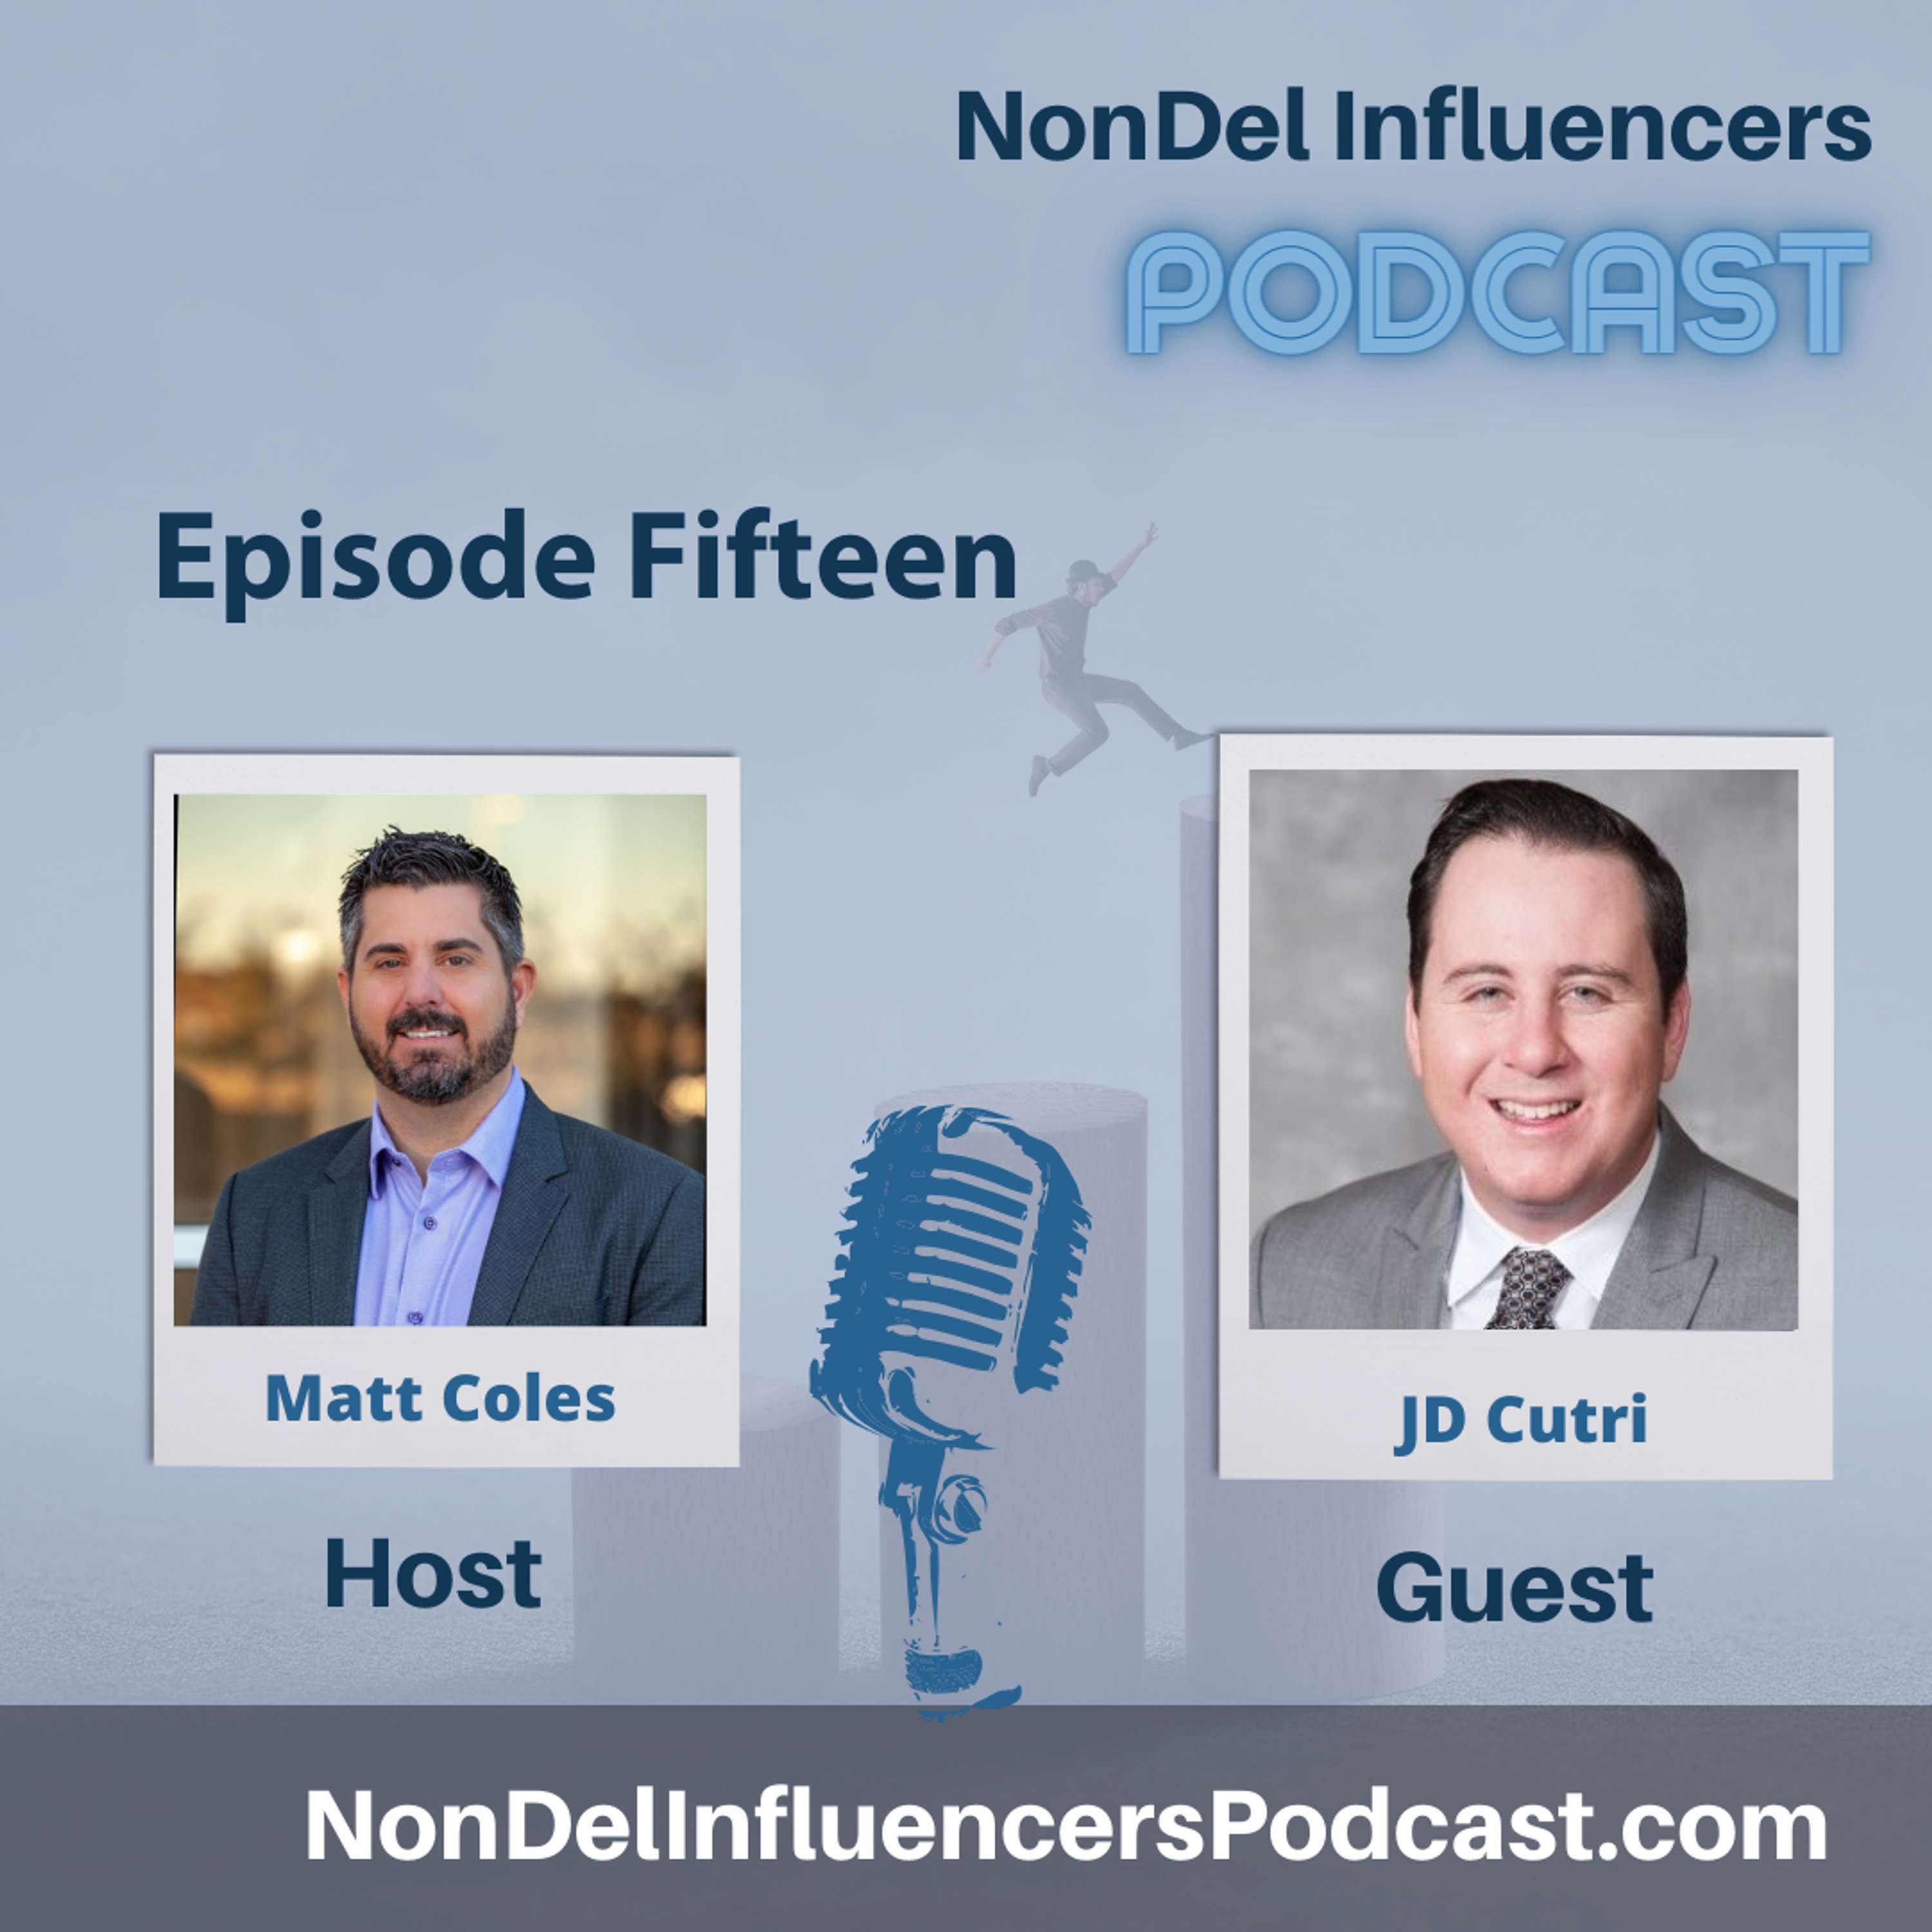 Episode Fifteen: Seize the Moment with JD Cutri: Becoming a Non-Delegated Lender and its Advantages